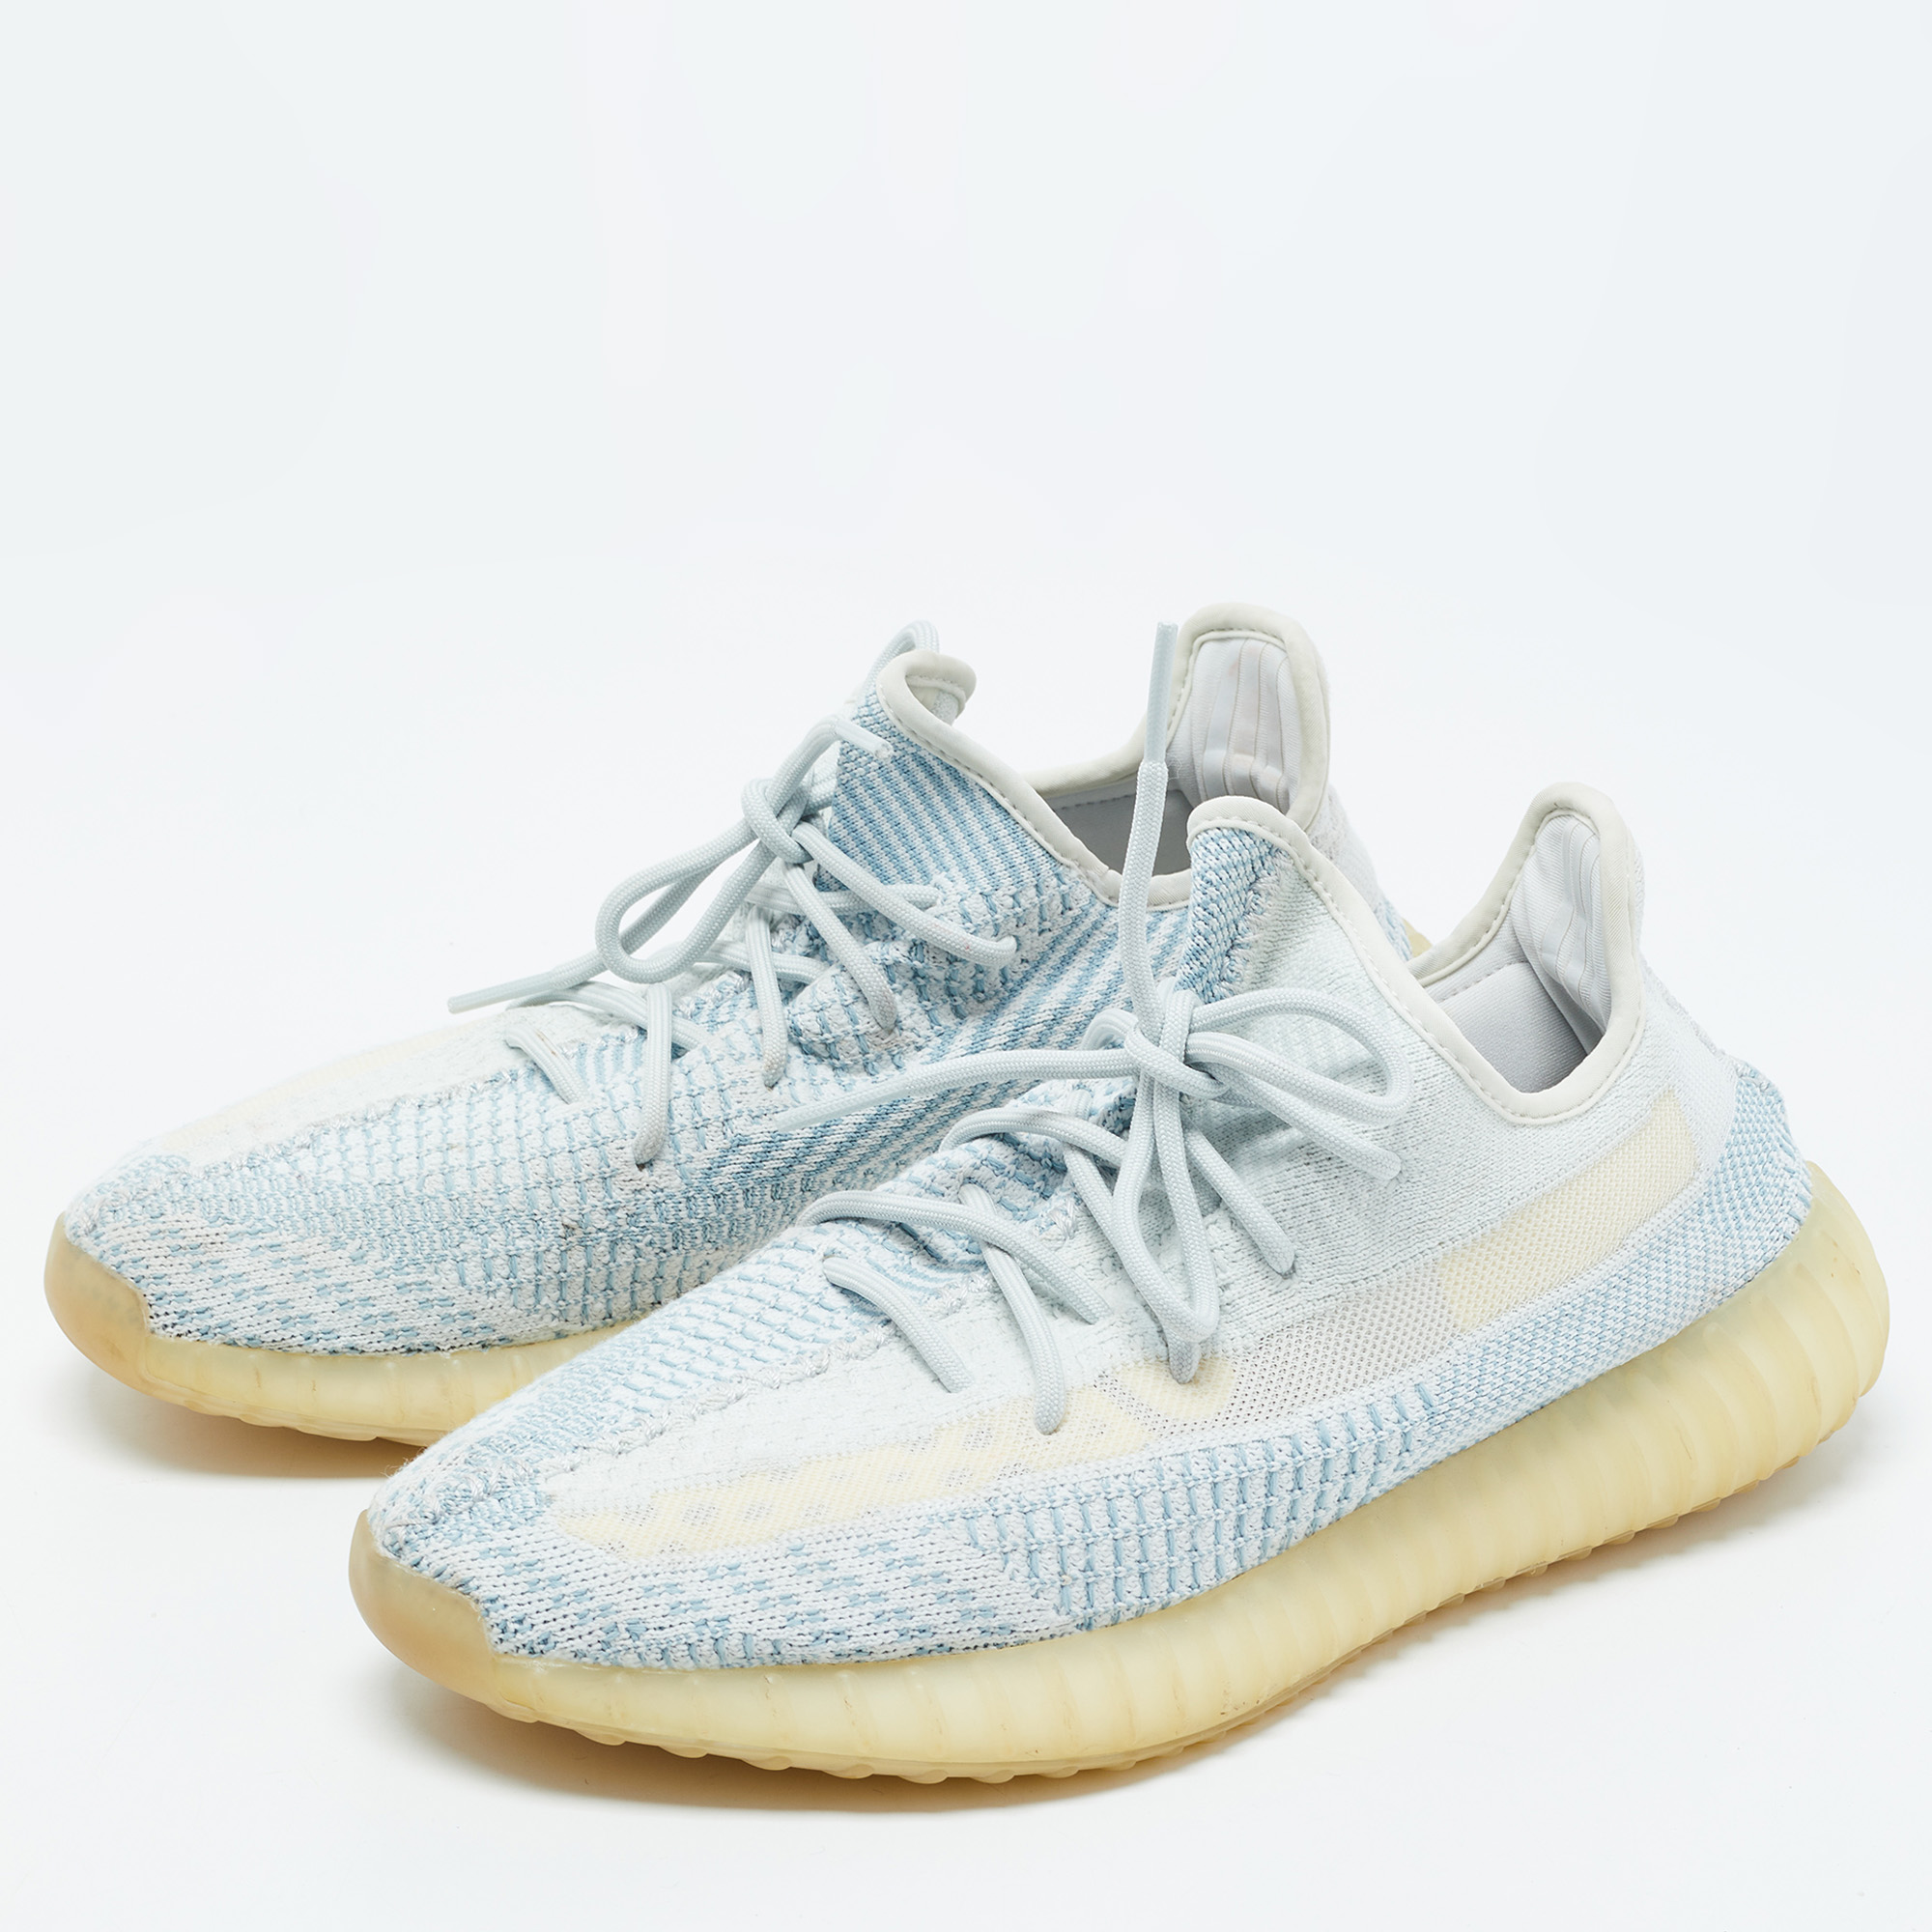 

Yeezy x Adidas White/Blue Knit Fabric Boost 350 V2 Static Non Reflective Sneakers Size